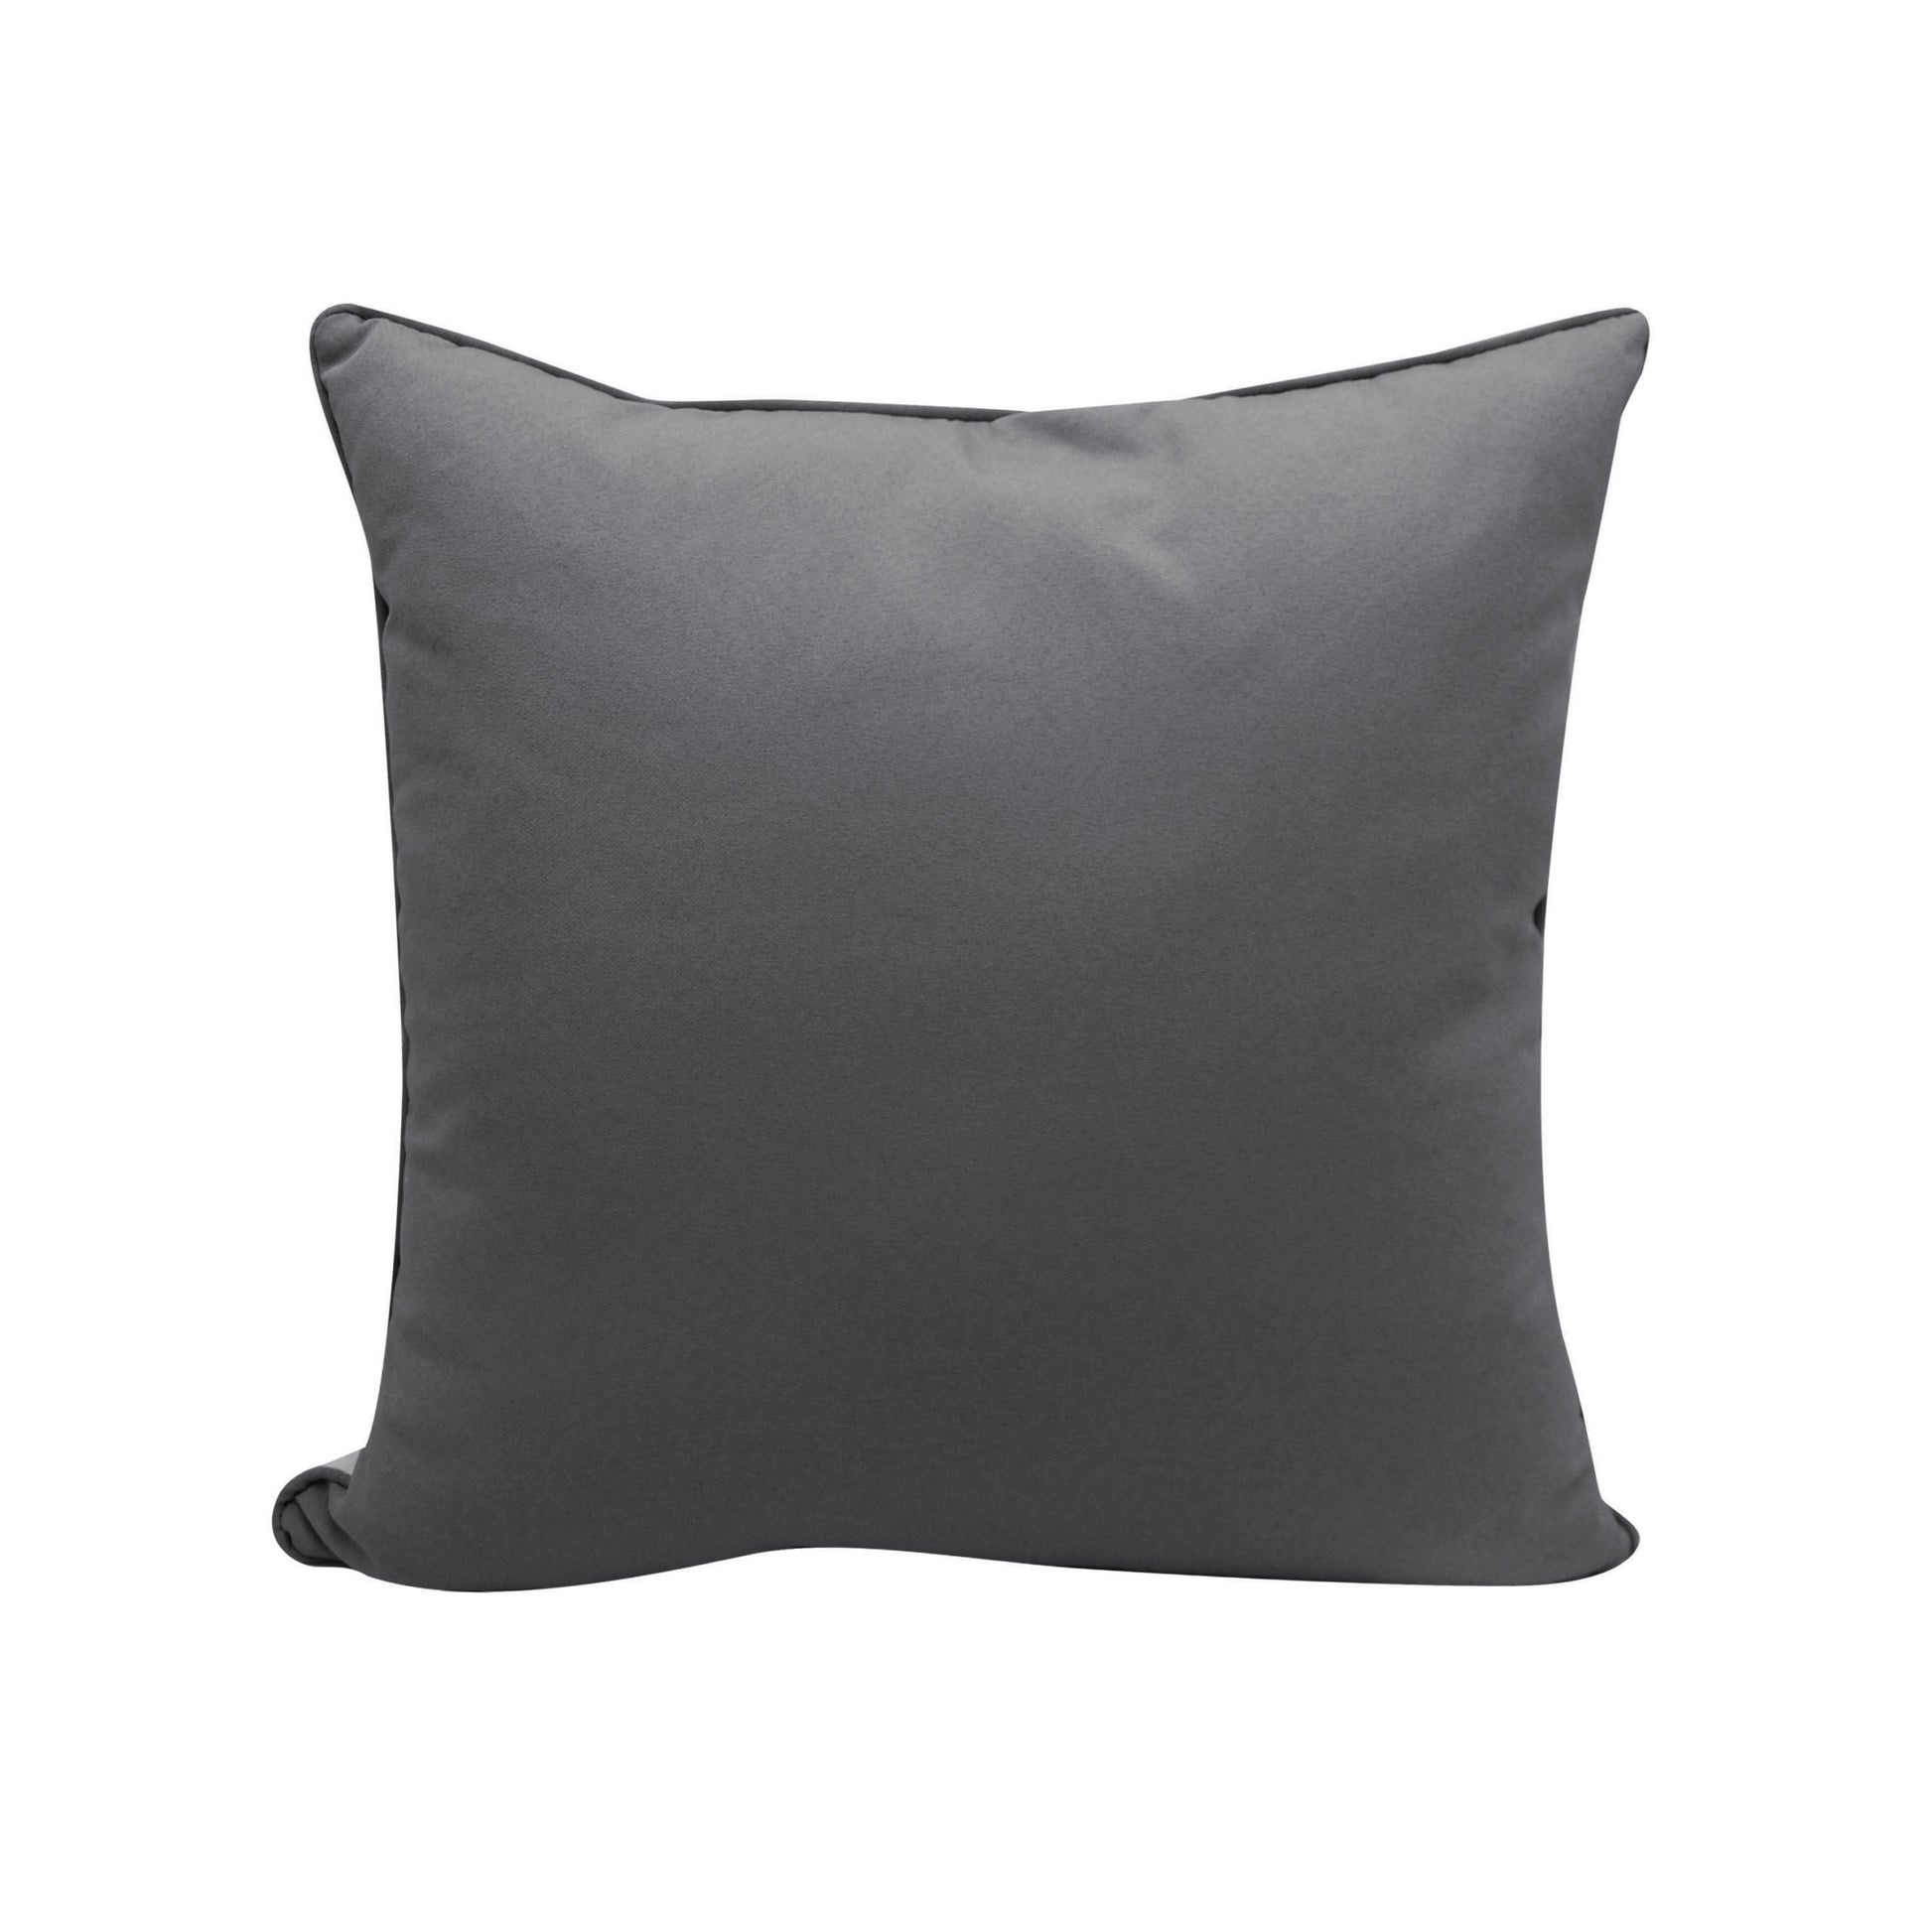 Solid grey fabric; the back of the Equine Pesade Indoor Outdoor Pillow.